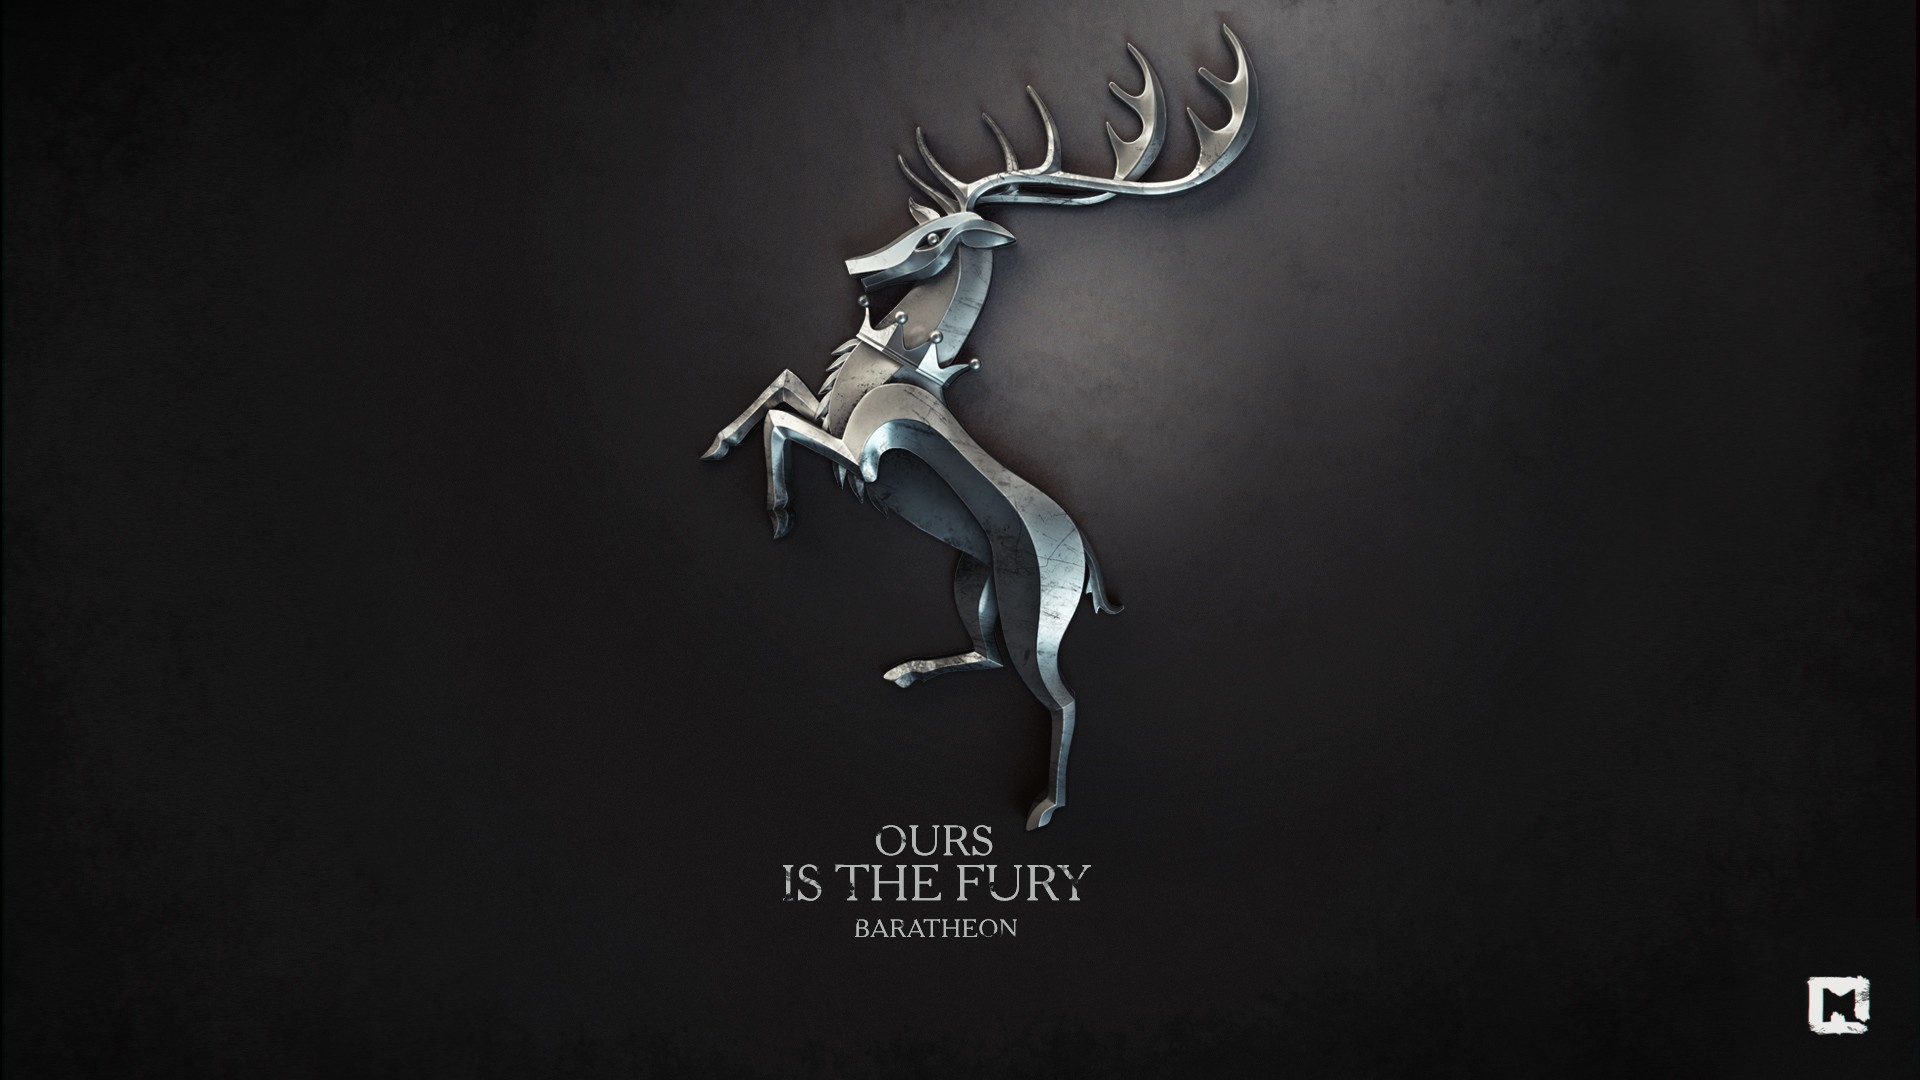 Game Of Thrones, A Song Of Ice And Fire, Digital Art, Sigils, House Baratheon Wallpaper